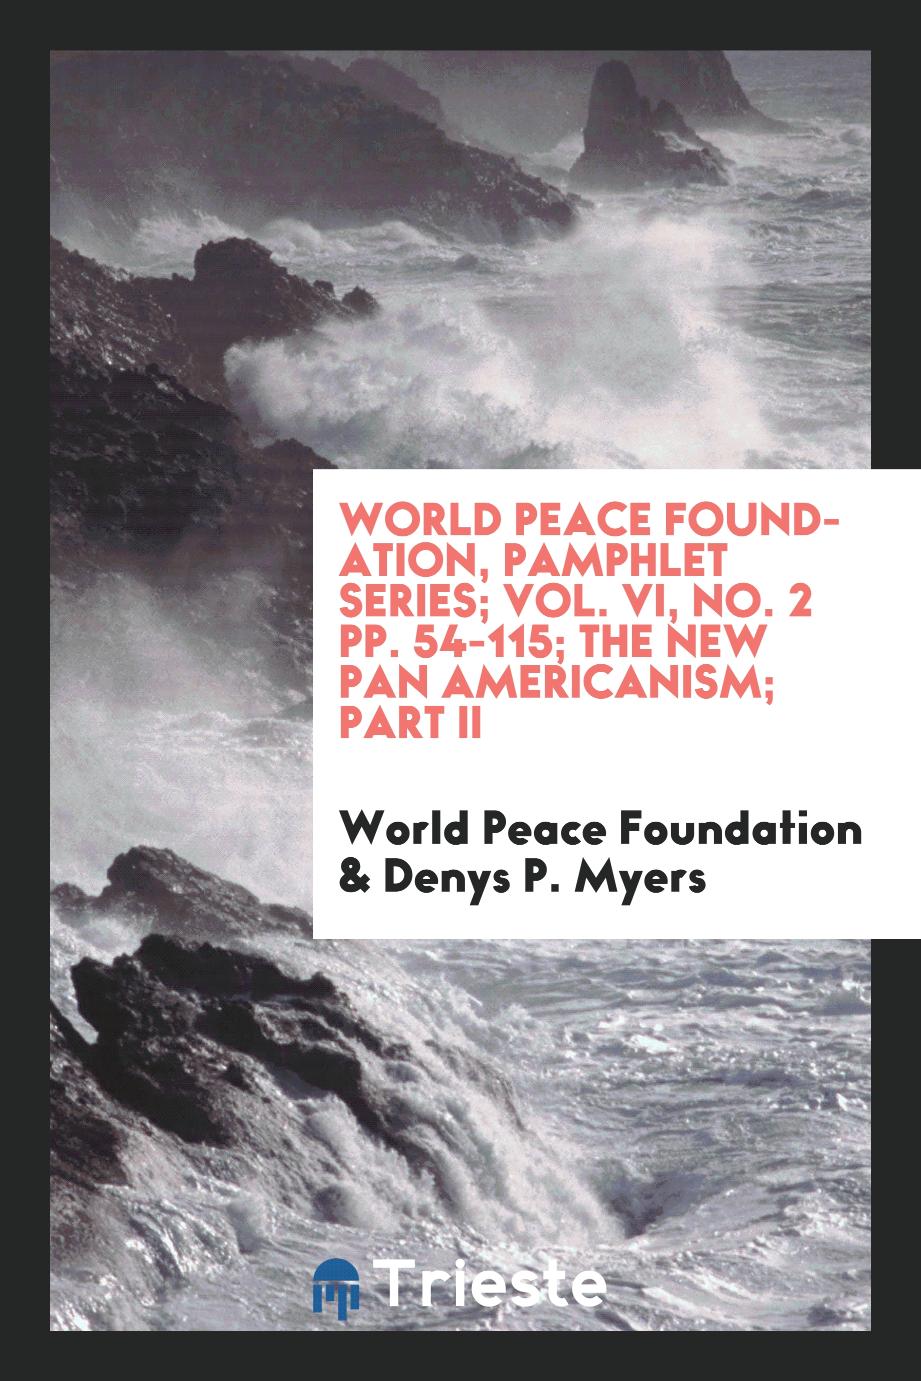 World Peace Foundation, Pamphlet Series; Vol. VI, No. 2 pp. 54-115; The New Pan Americanism; Part II